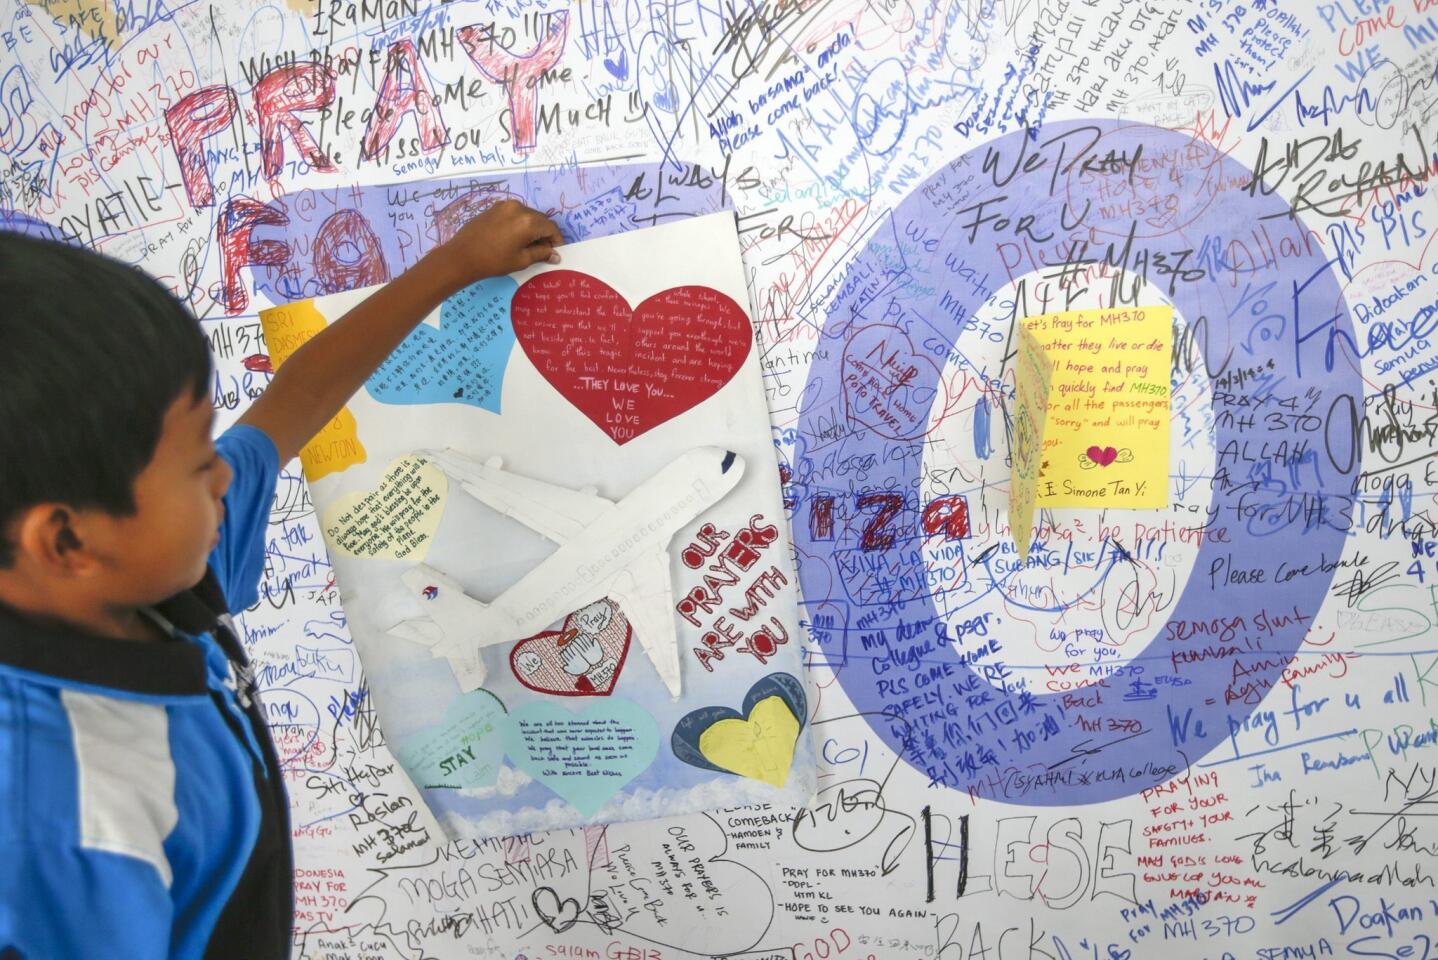 A boy holds a message at the Wall of Hope for the passengers of the missing Malaysian Airlines plane at Kuala Lumpur International Airport, Malaysia, 17 March 2014.